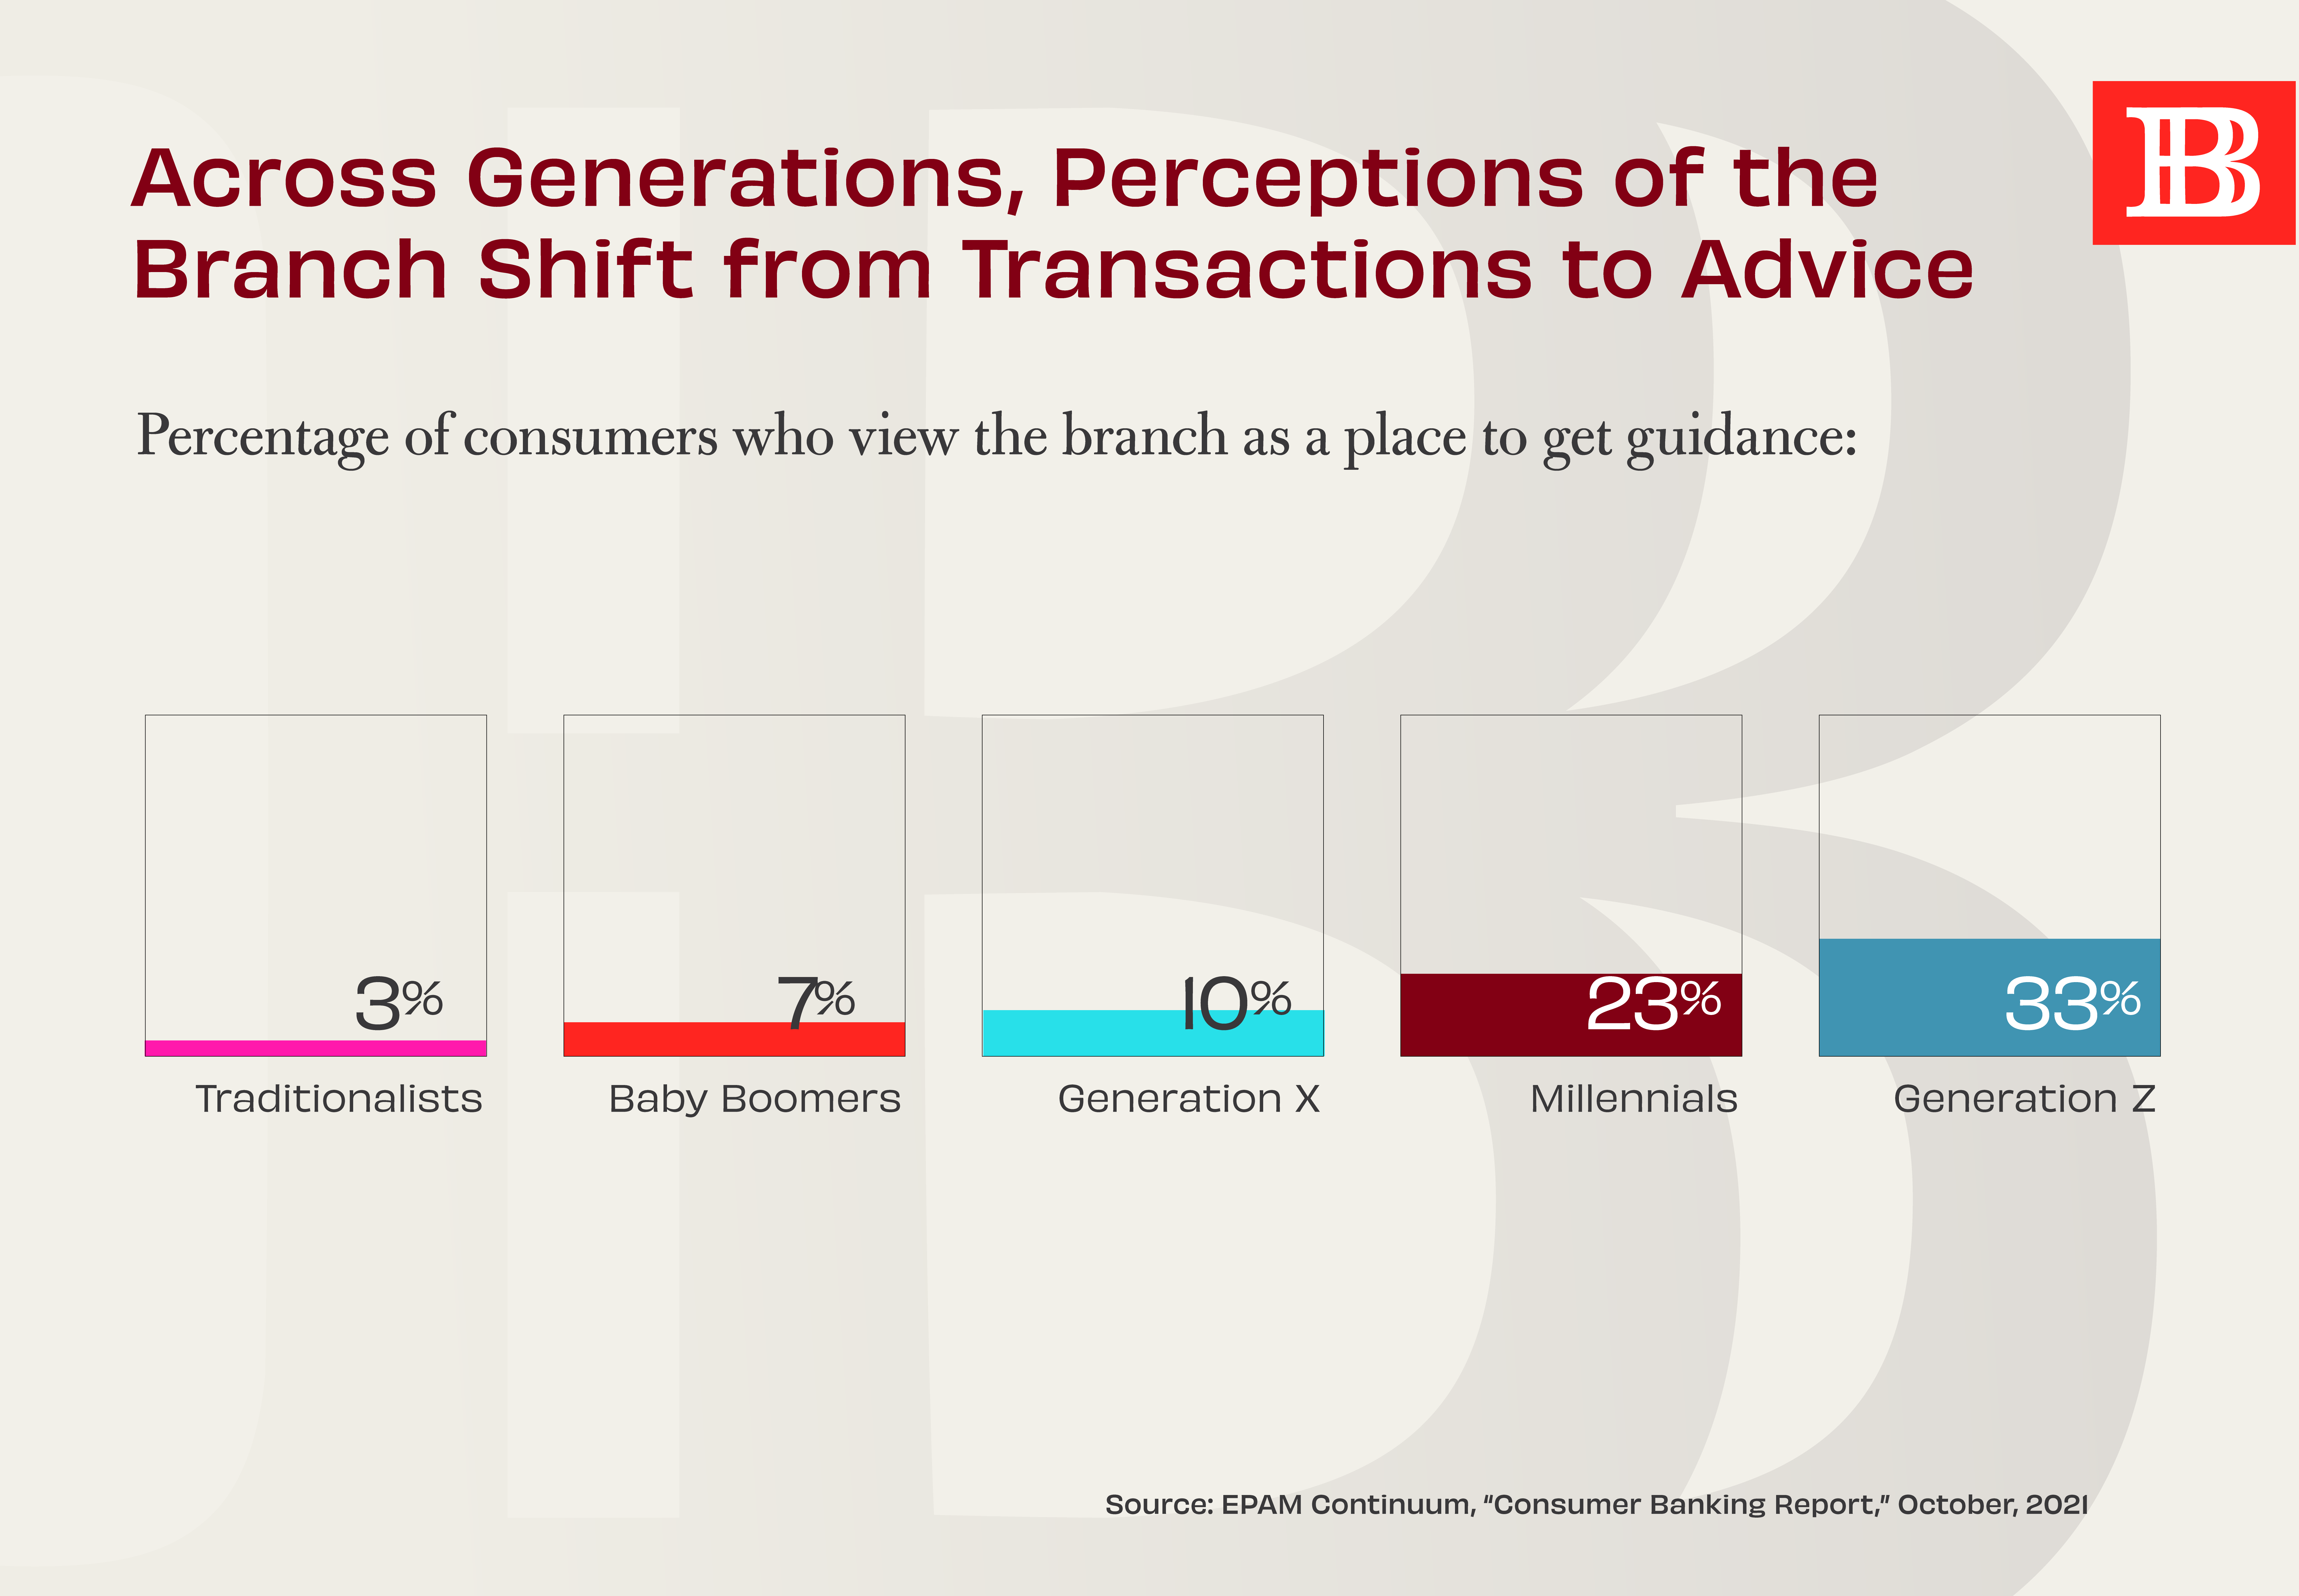 Bar graph showing what percentage of consumers view the branch as a place for financial advice, by generation